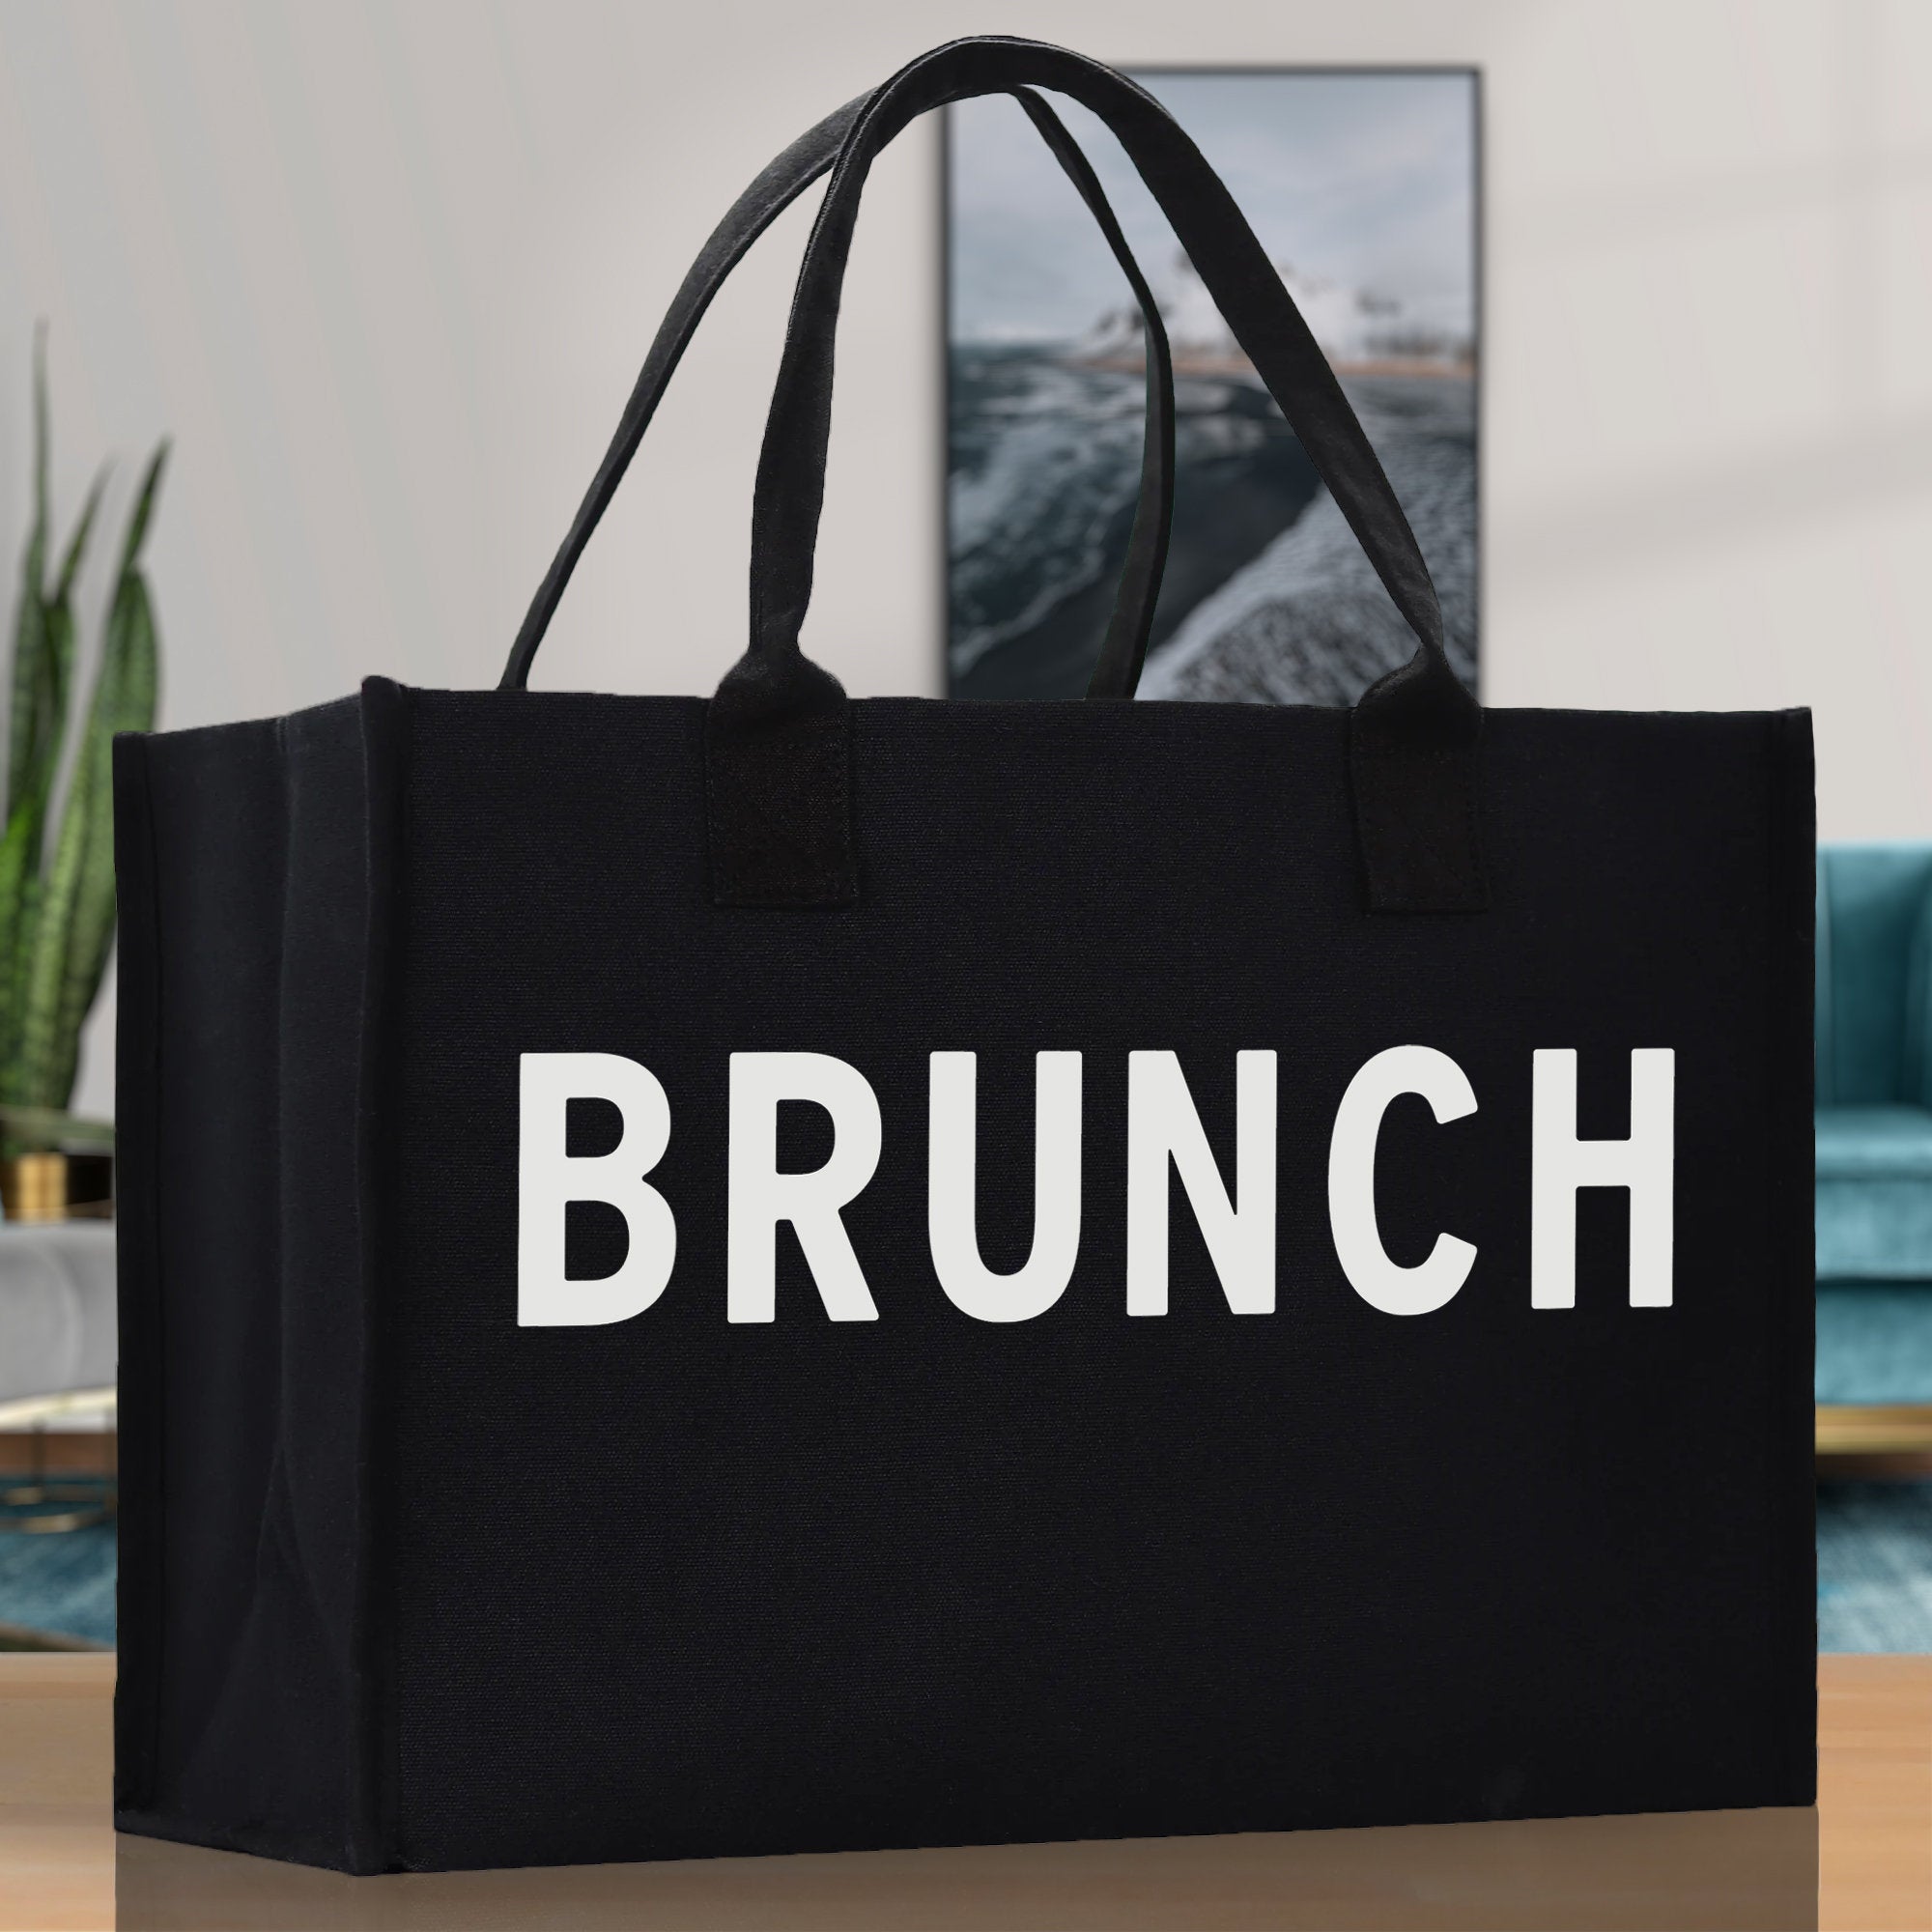 Brunch Cotton Canvas Chic Beach Tote Bag Multipurpose Tote Weekender Tote Gift for Her Outdoor Tote Vacation Tote Large Beach Bag